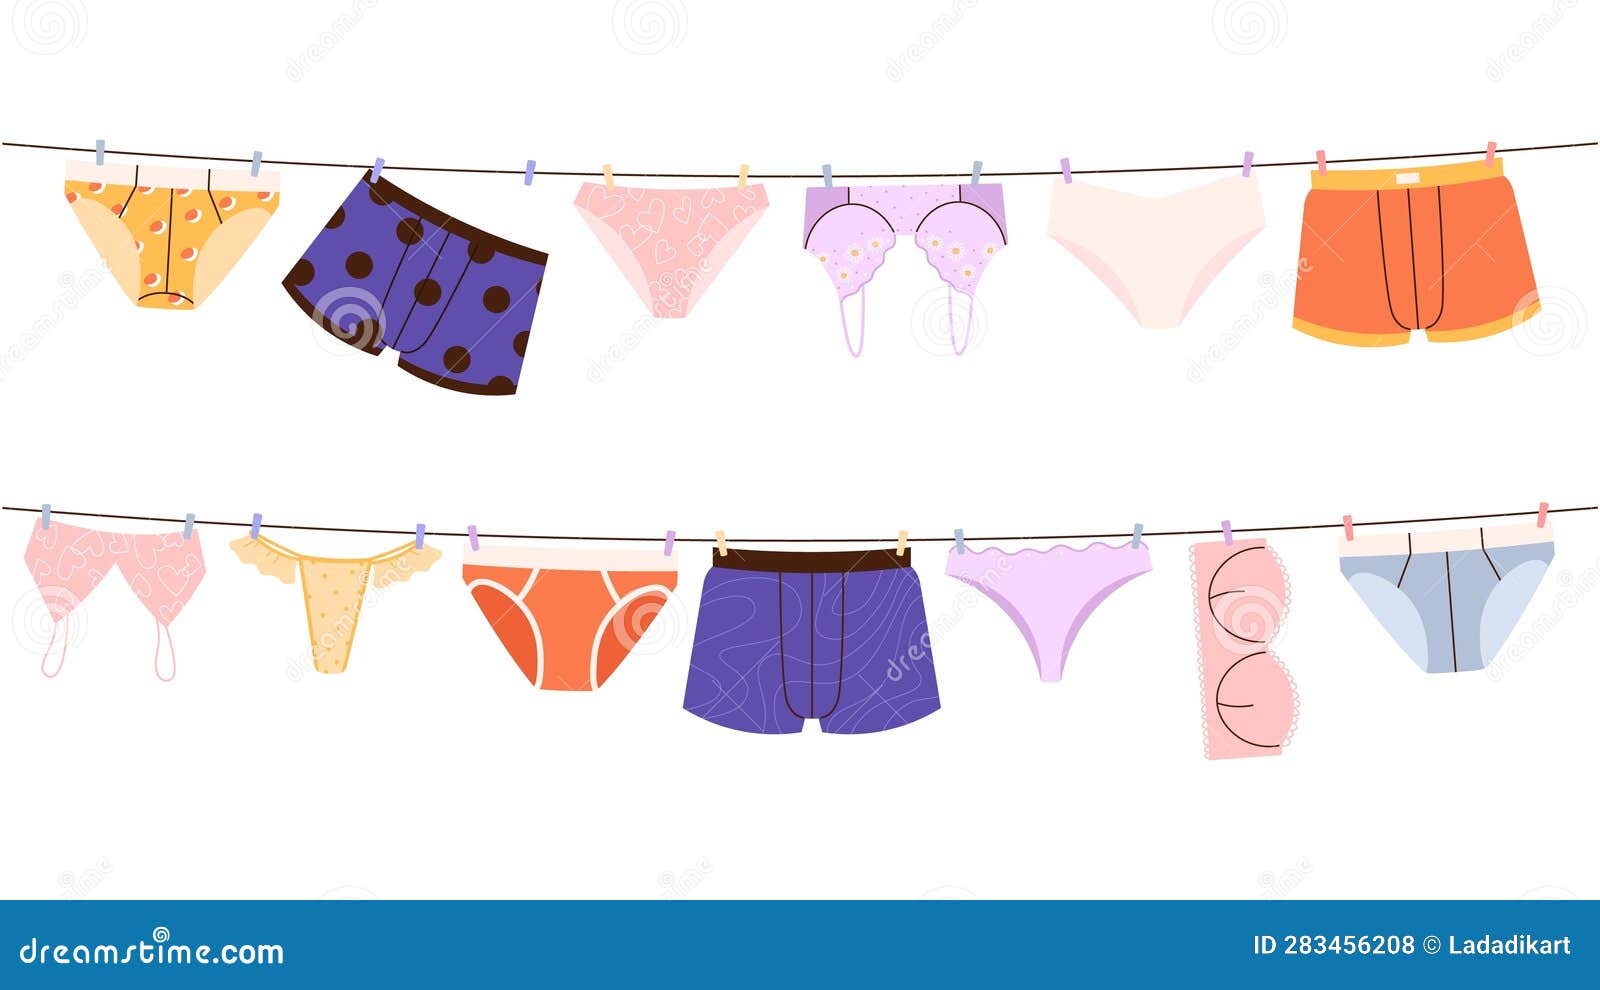 1,528 Panties Hanging On Line Images, Stock Photos, 3D objects